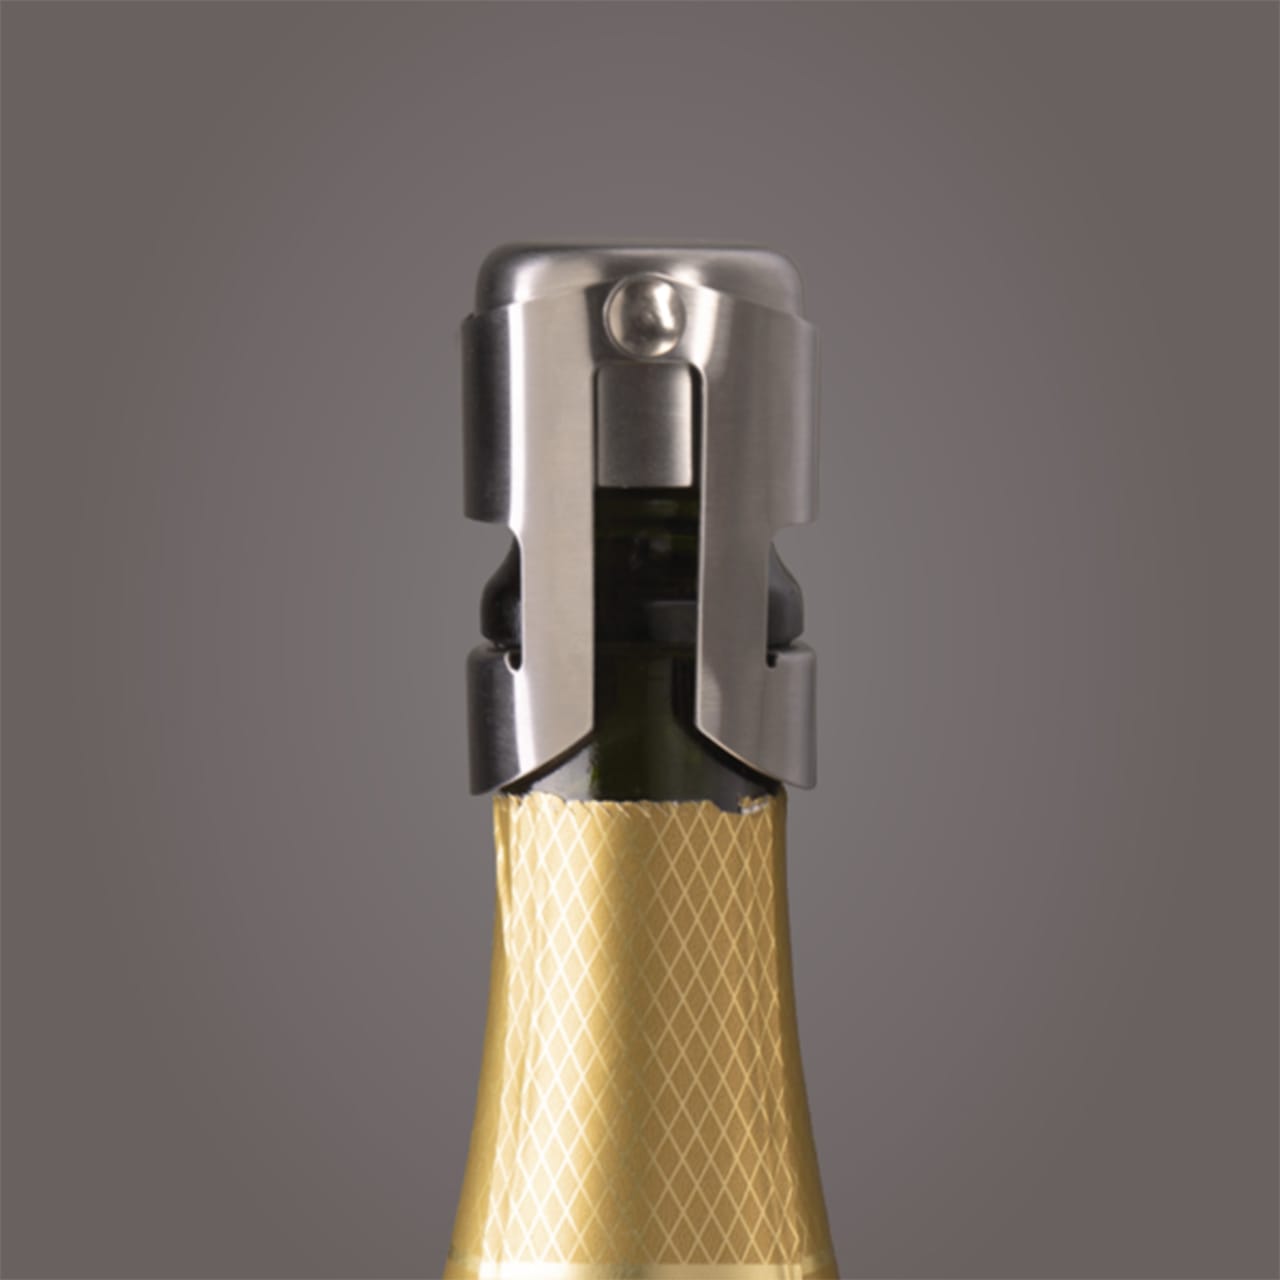 Champagne Stopper Stainless Steel